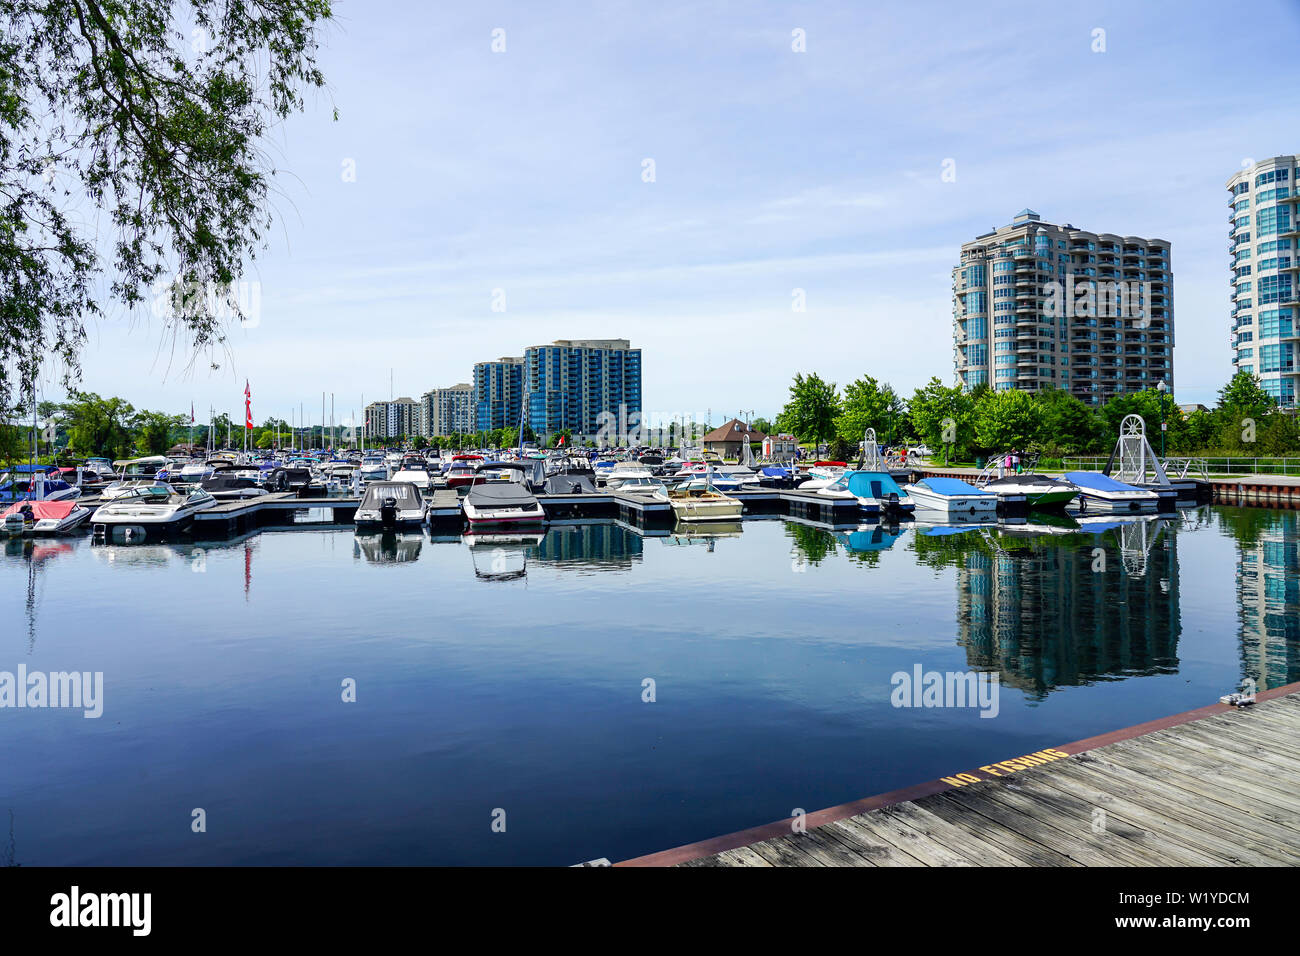 Barrie, Ontario, Canada, City in Northern Ontario, Lake Simcoe, Kempenfelt Bay, with lots of Boats and Condos on the lake. Stock Photo